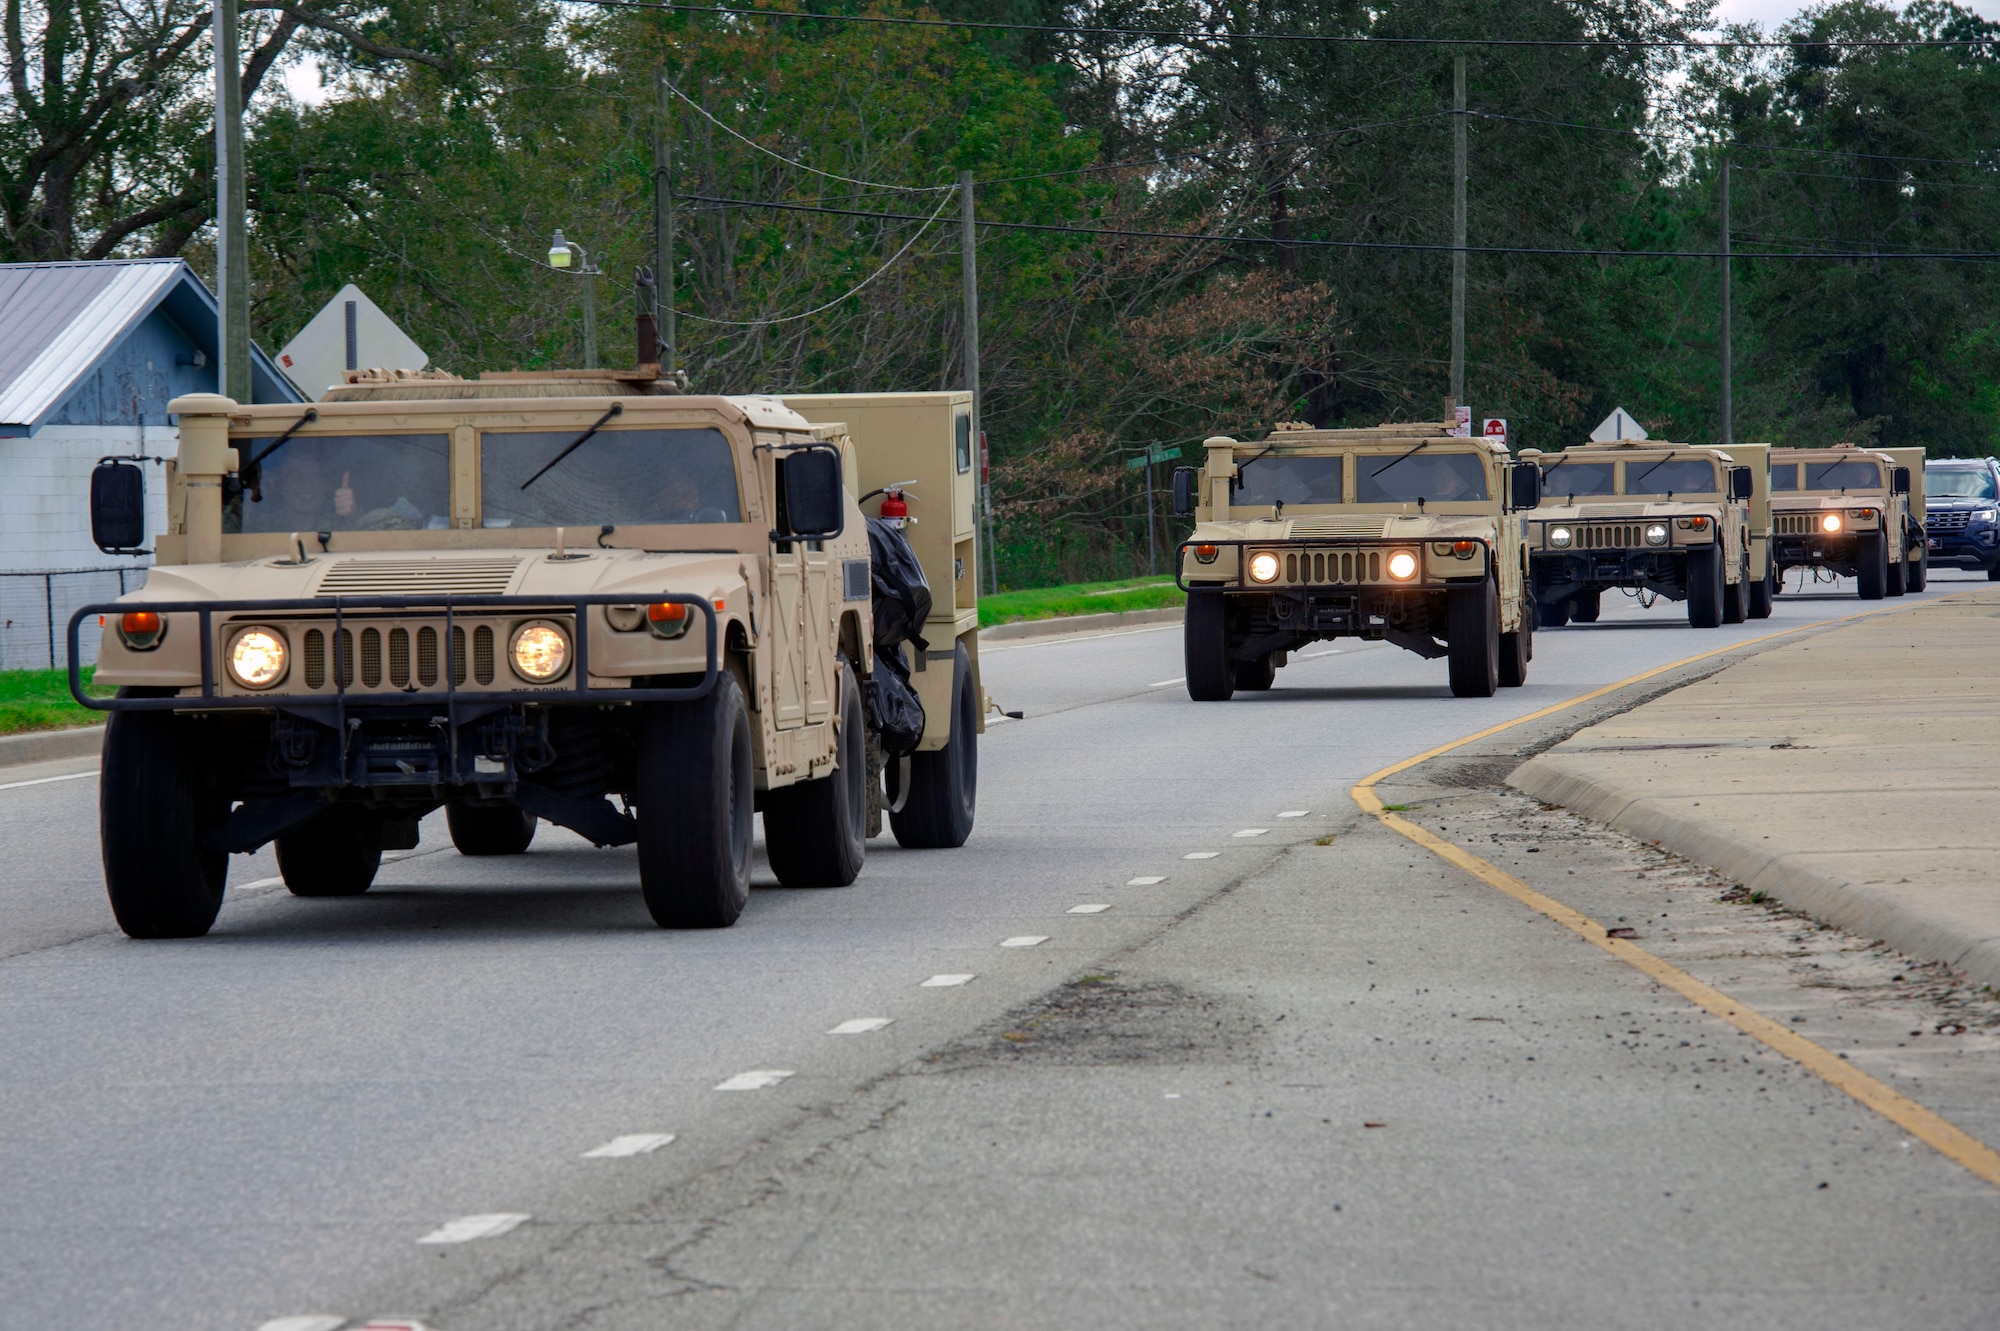 Airmen from the 822d Base Defense Squadron depart Moody Air Force Base, Ga., as they convoy en route to Tyndall AFB, Fla., to provide base security during Hurricane Michael recovery efforts, Oct. 11, 2018. Moody’s ‘Safeside’ defenders will secure the area as Tyndall’s Ride Out Element conducts damage assessments during the aftermath. Since Oct. 8 and until further notice, Tyndall has been on evacuation notice. (U.S. Air Force photo by Senior Airman Greg Nash)